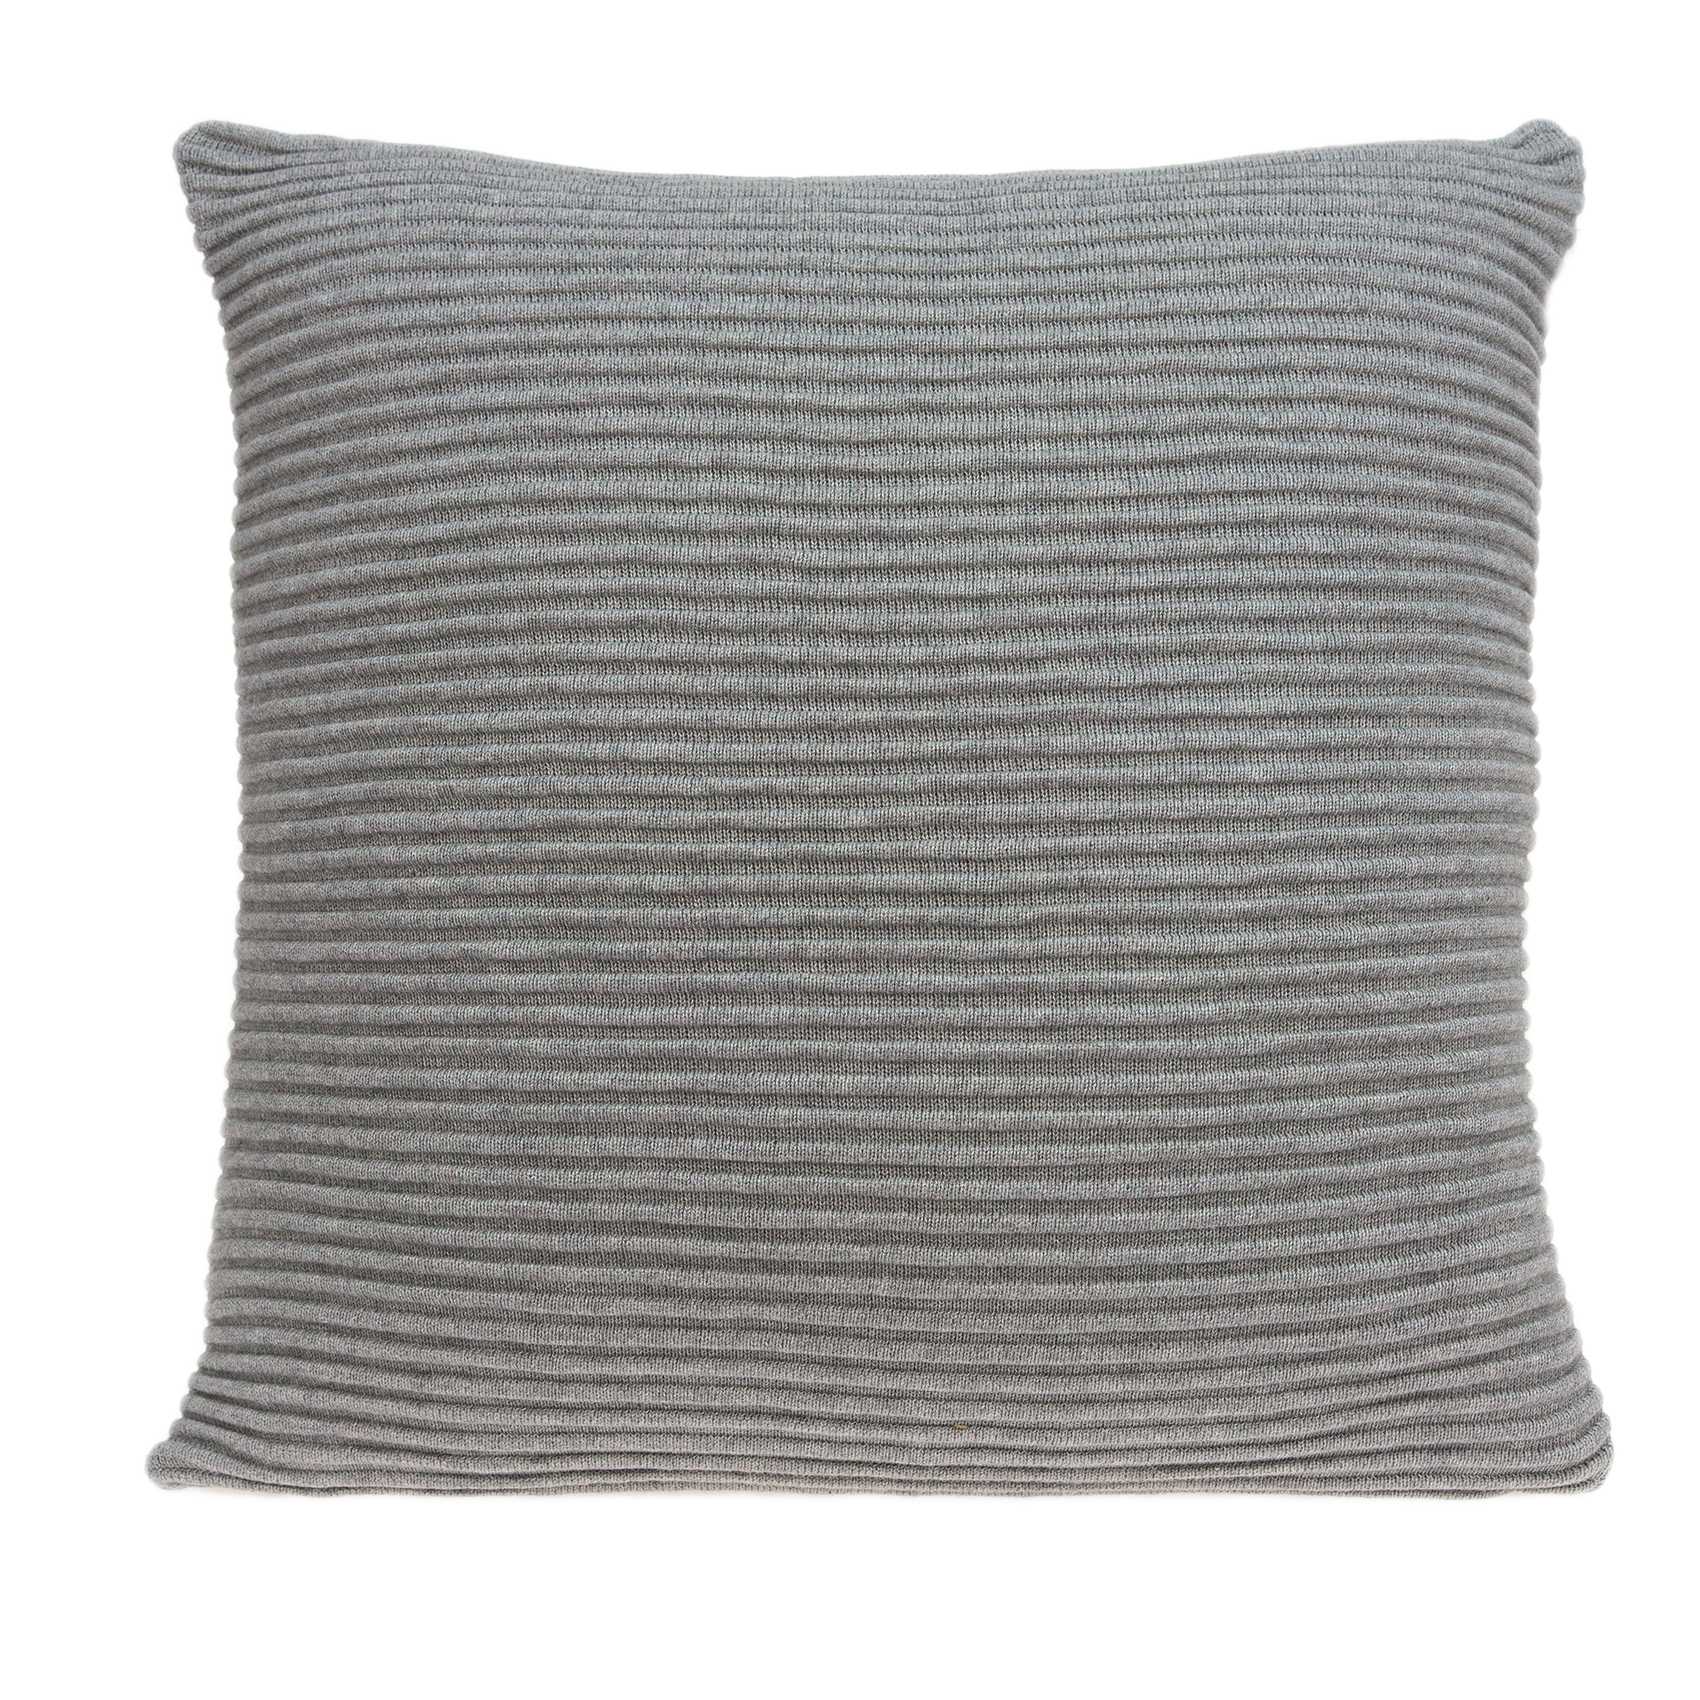 20" x 0.5" x 20" Transitional Gray Pillow Cover